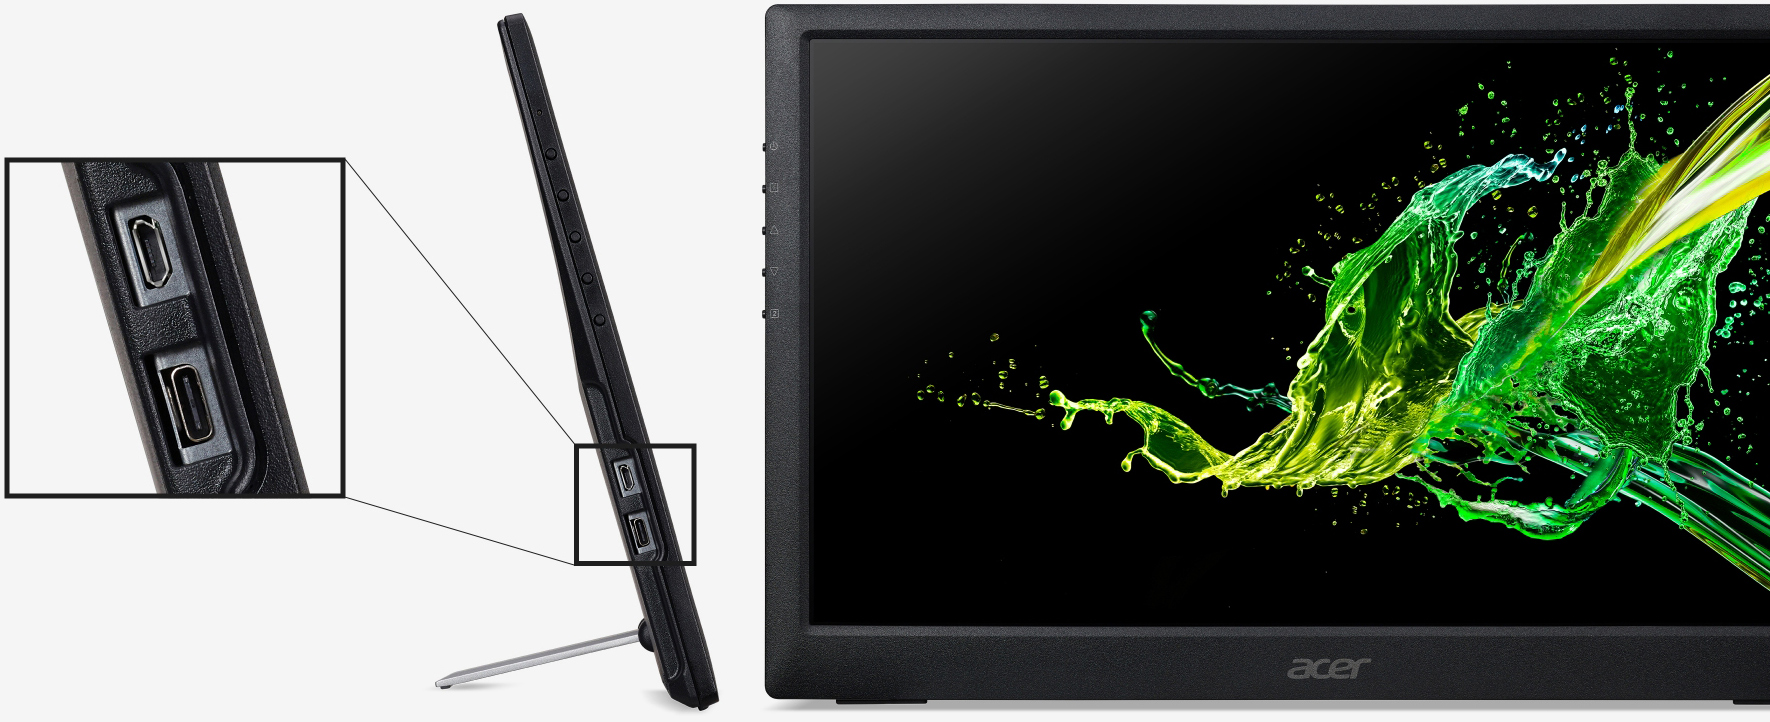 Acer Launches Cheap USB-C Monitor for Laptops: The 15.6-Inch Acer PM1